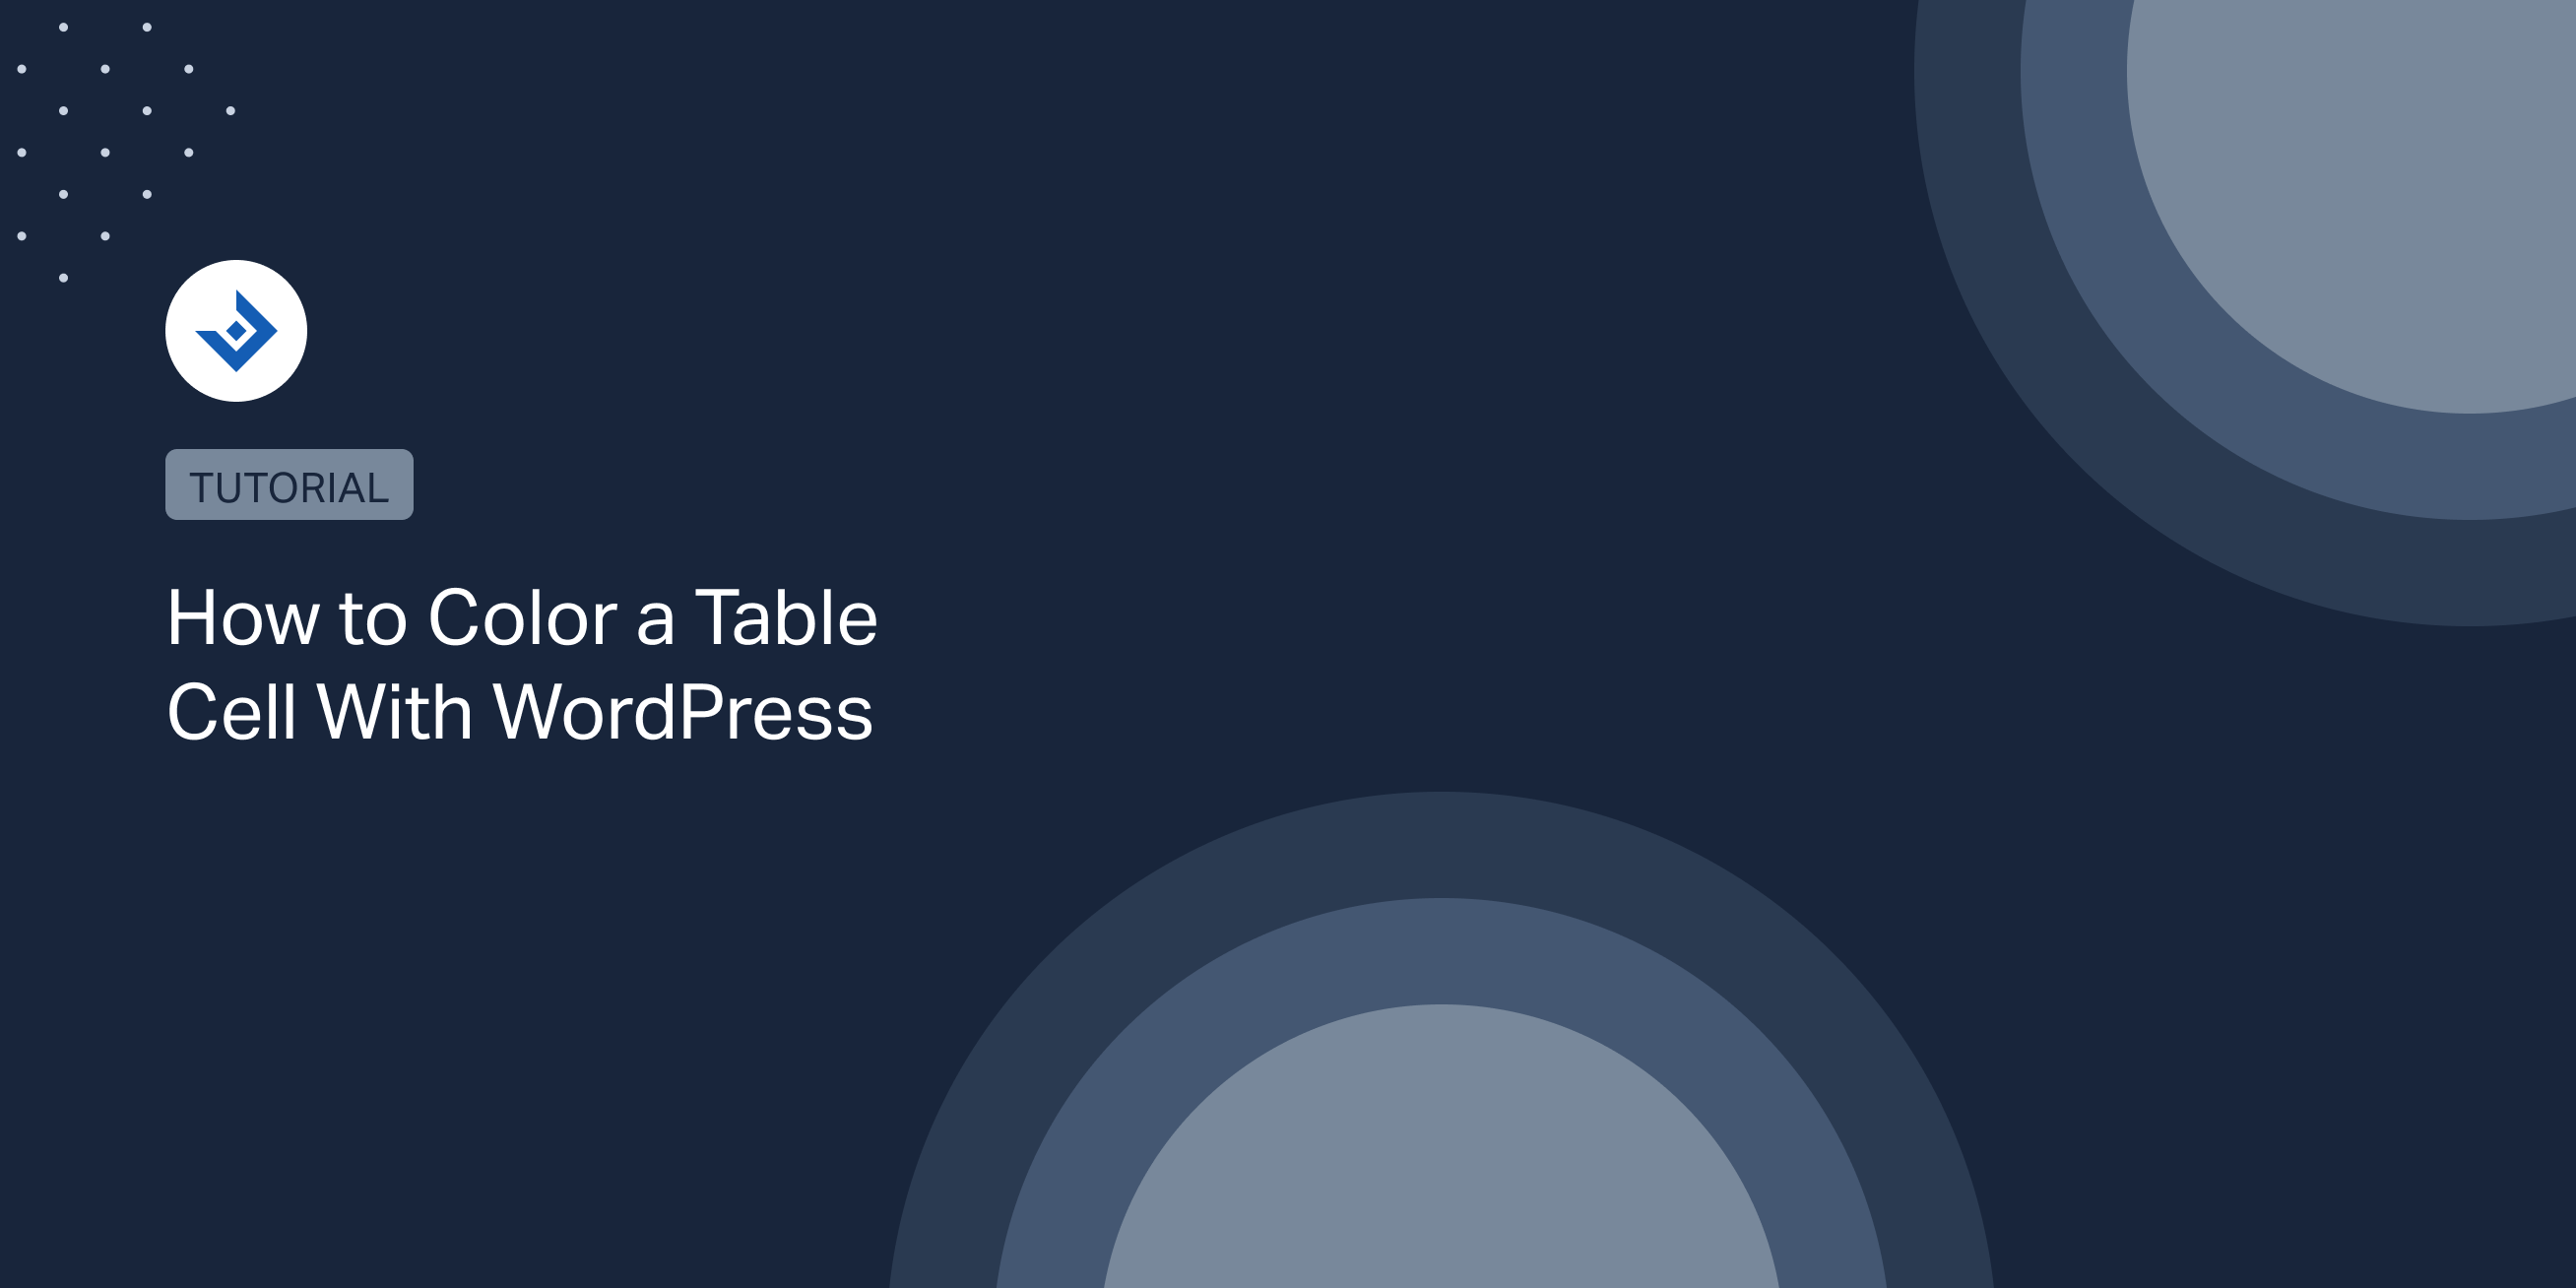 How to Color a Table Cell With WordPress